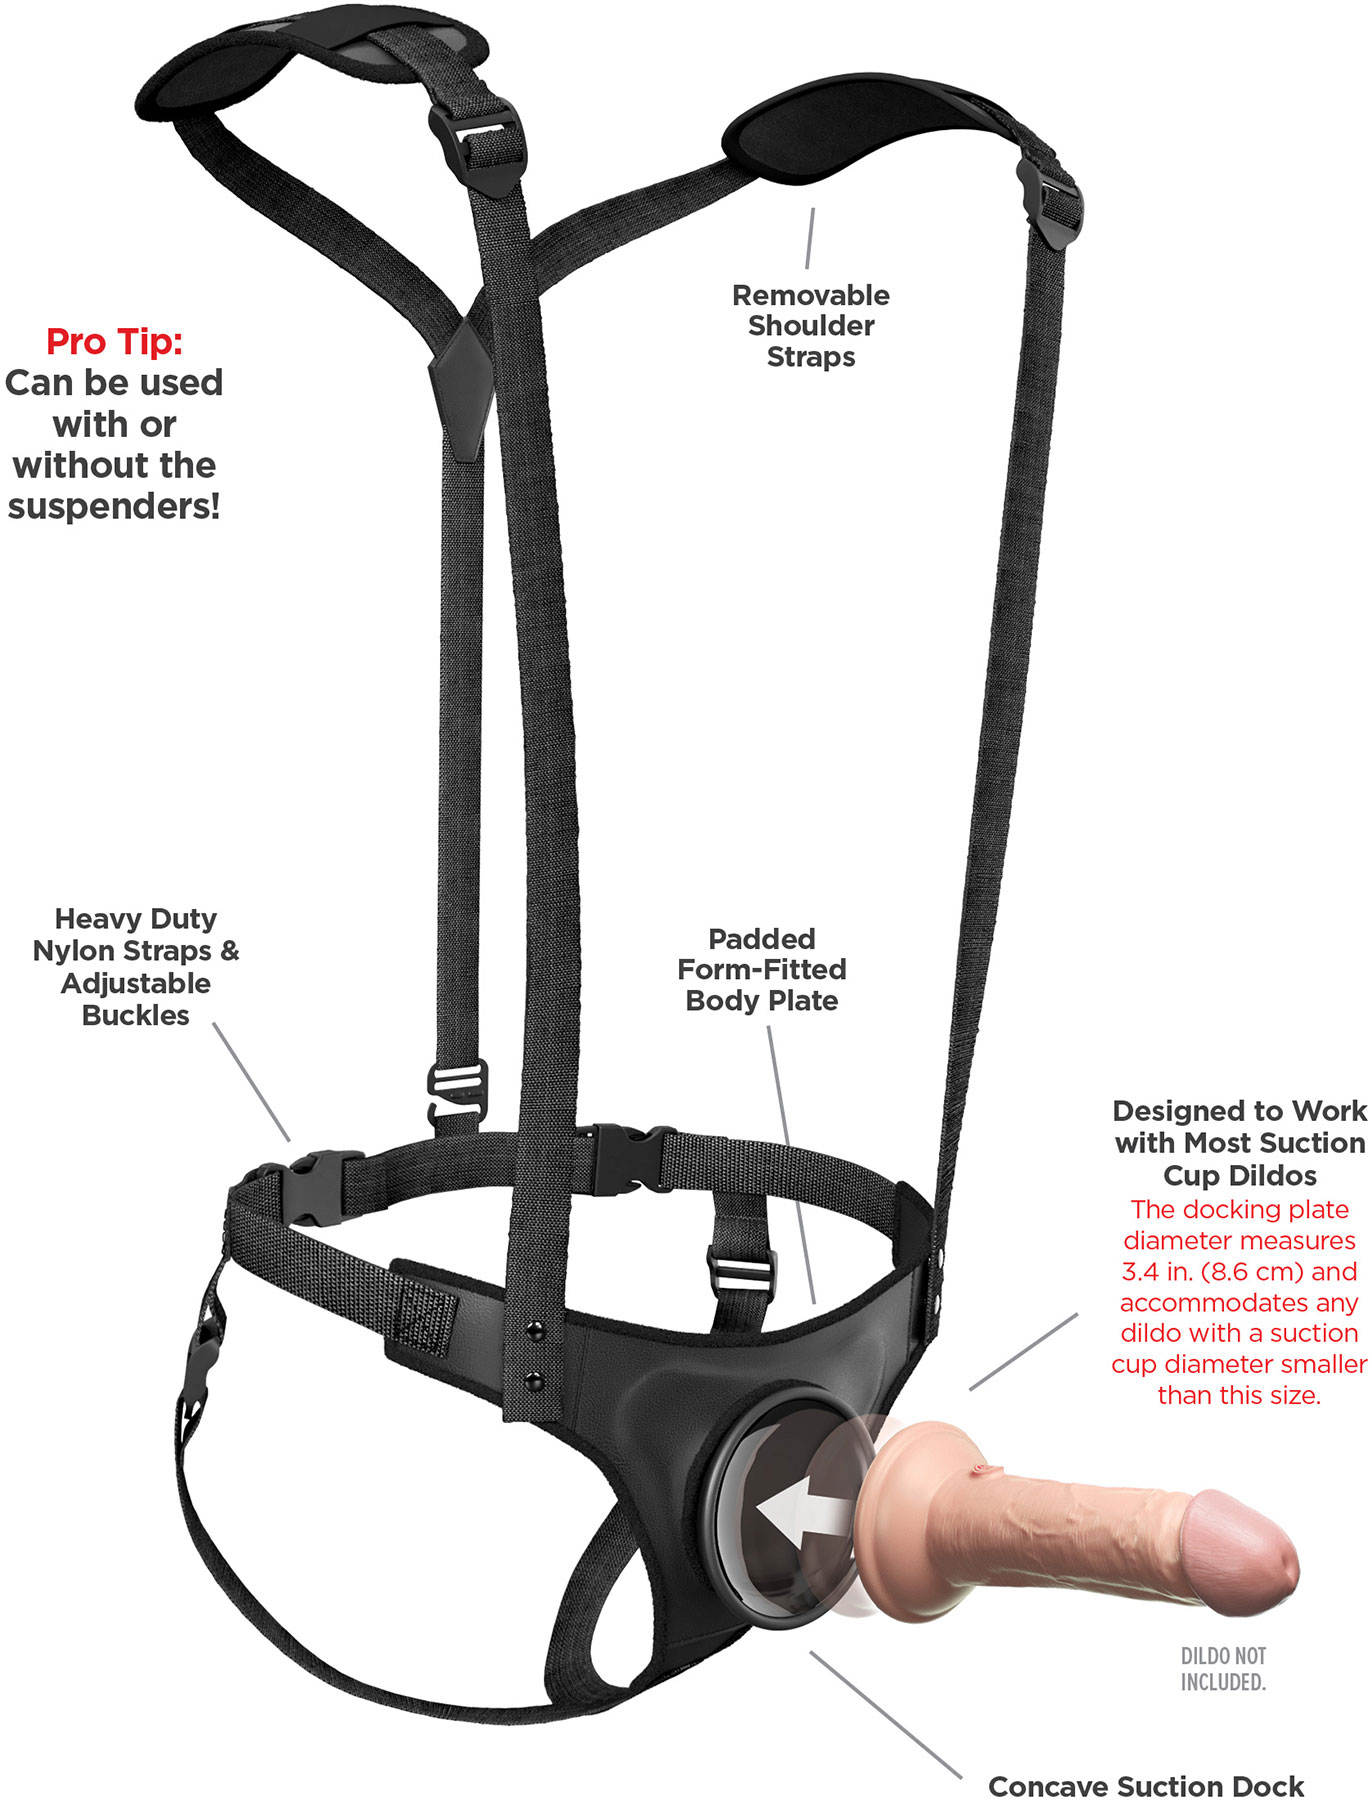 Body Dock Suspenders Strap-On Harness System - Features Graphic